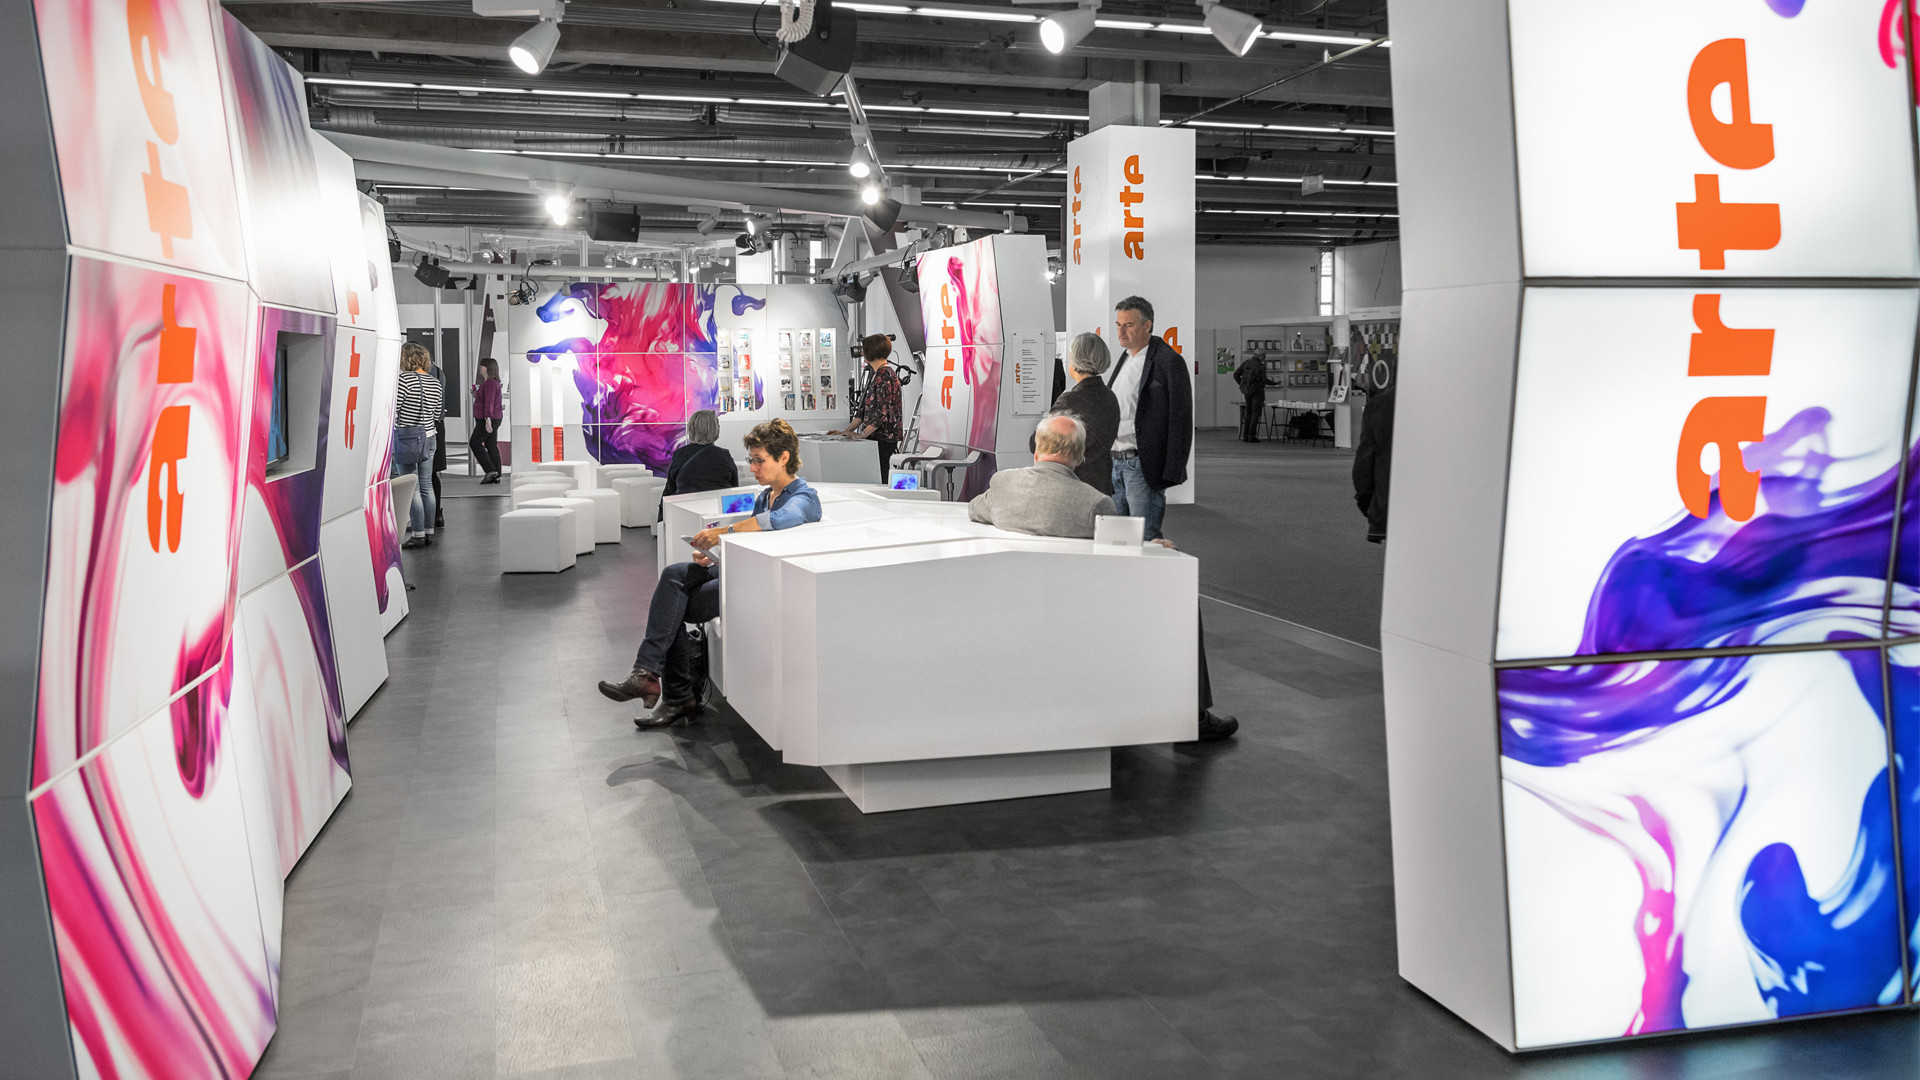 Dart stages the Arte fair stand at the Frankfurter Buchmesse 2017